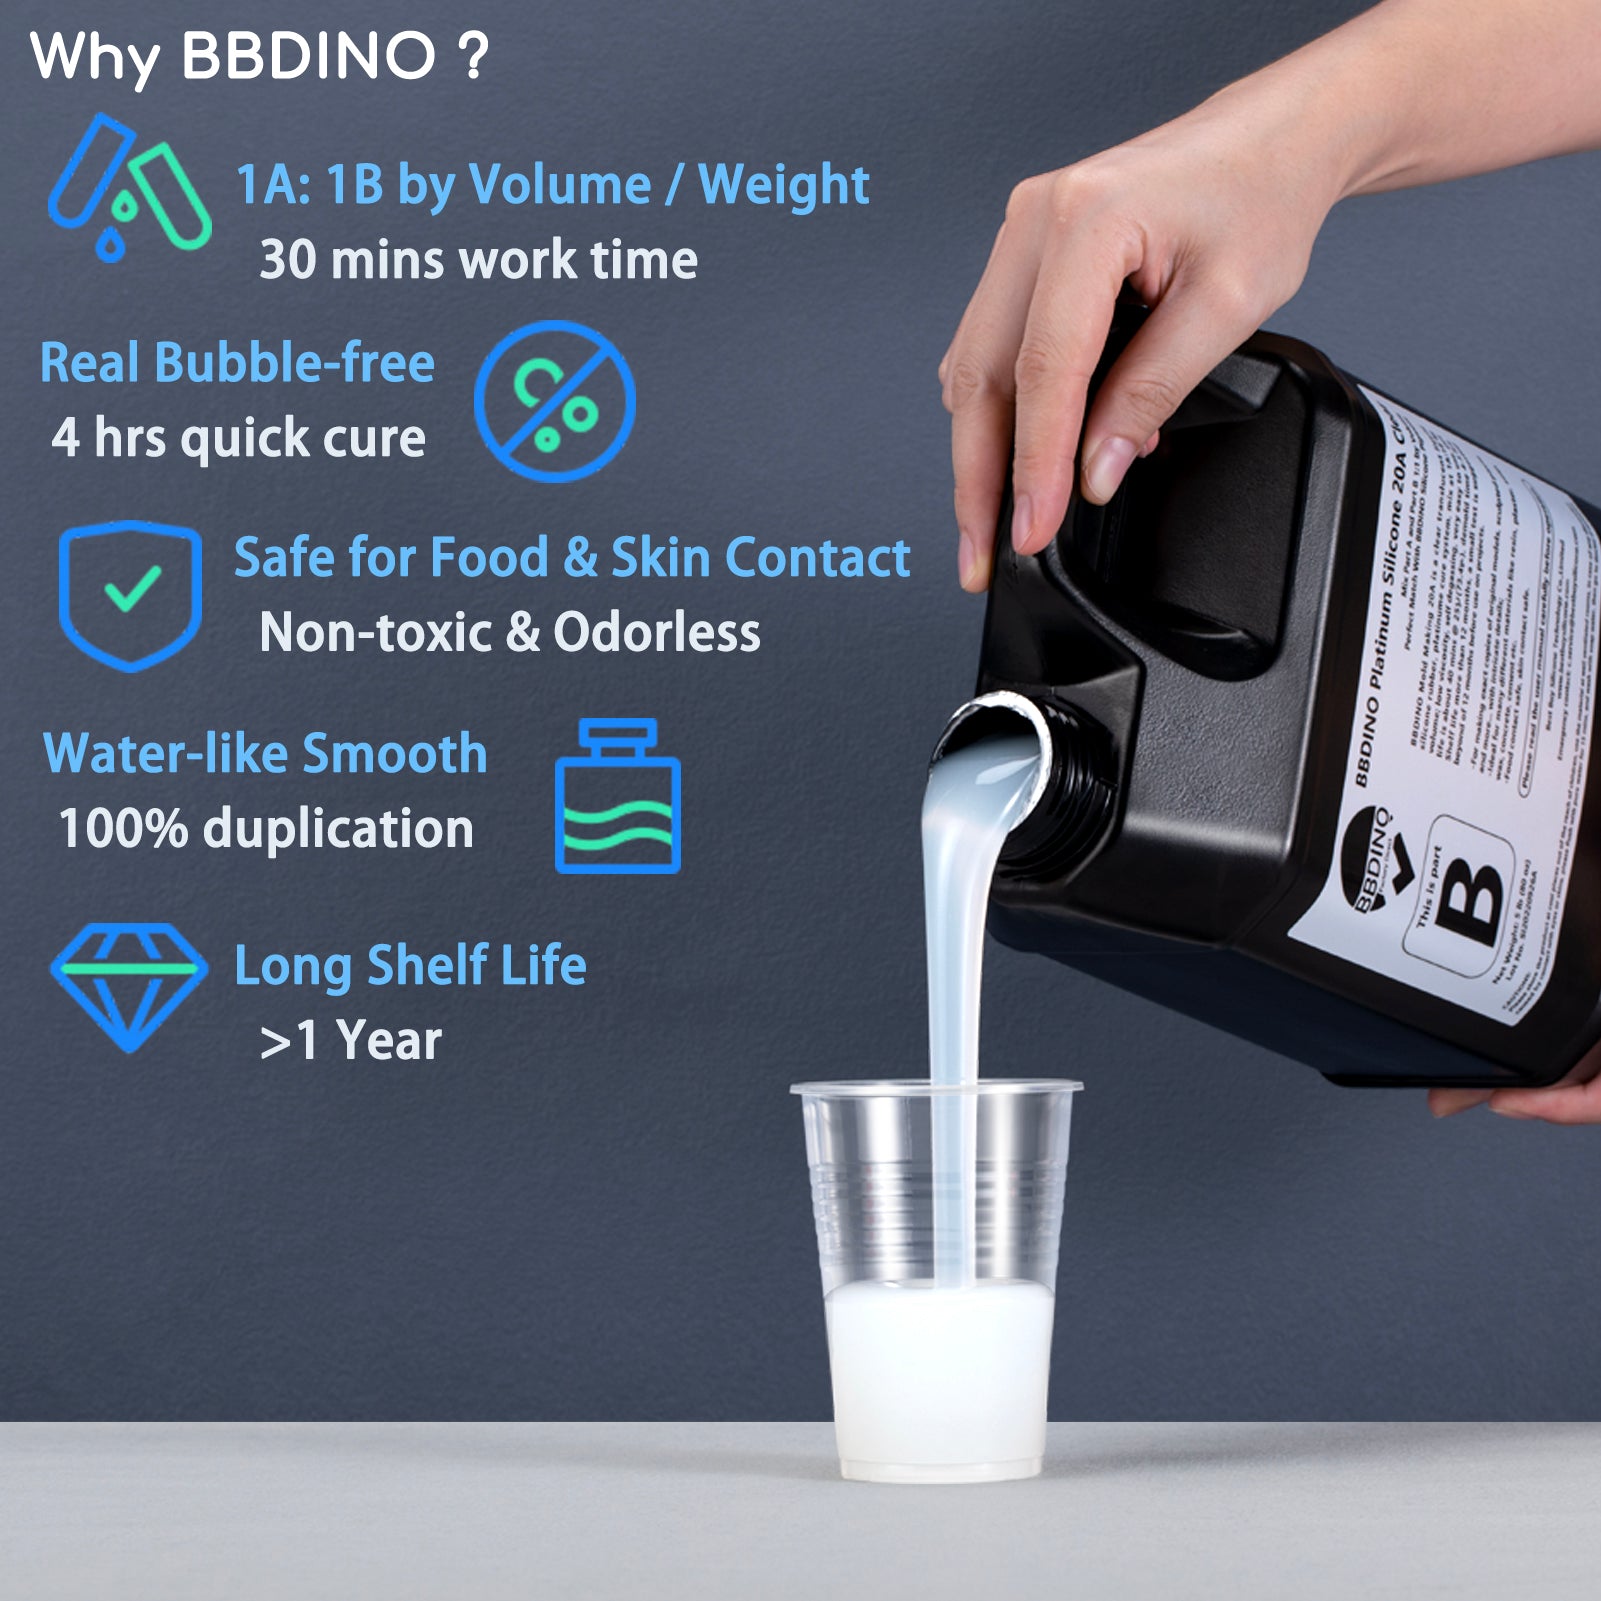 BBDINO Silicone Mold Making Kit, Liquid Silicone for Mold Making, 2.64 lbs  (42 Oz), Fast Cure Mold Making Silicone Rubber, 1:1 Ideal for Casting